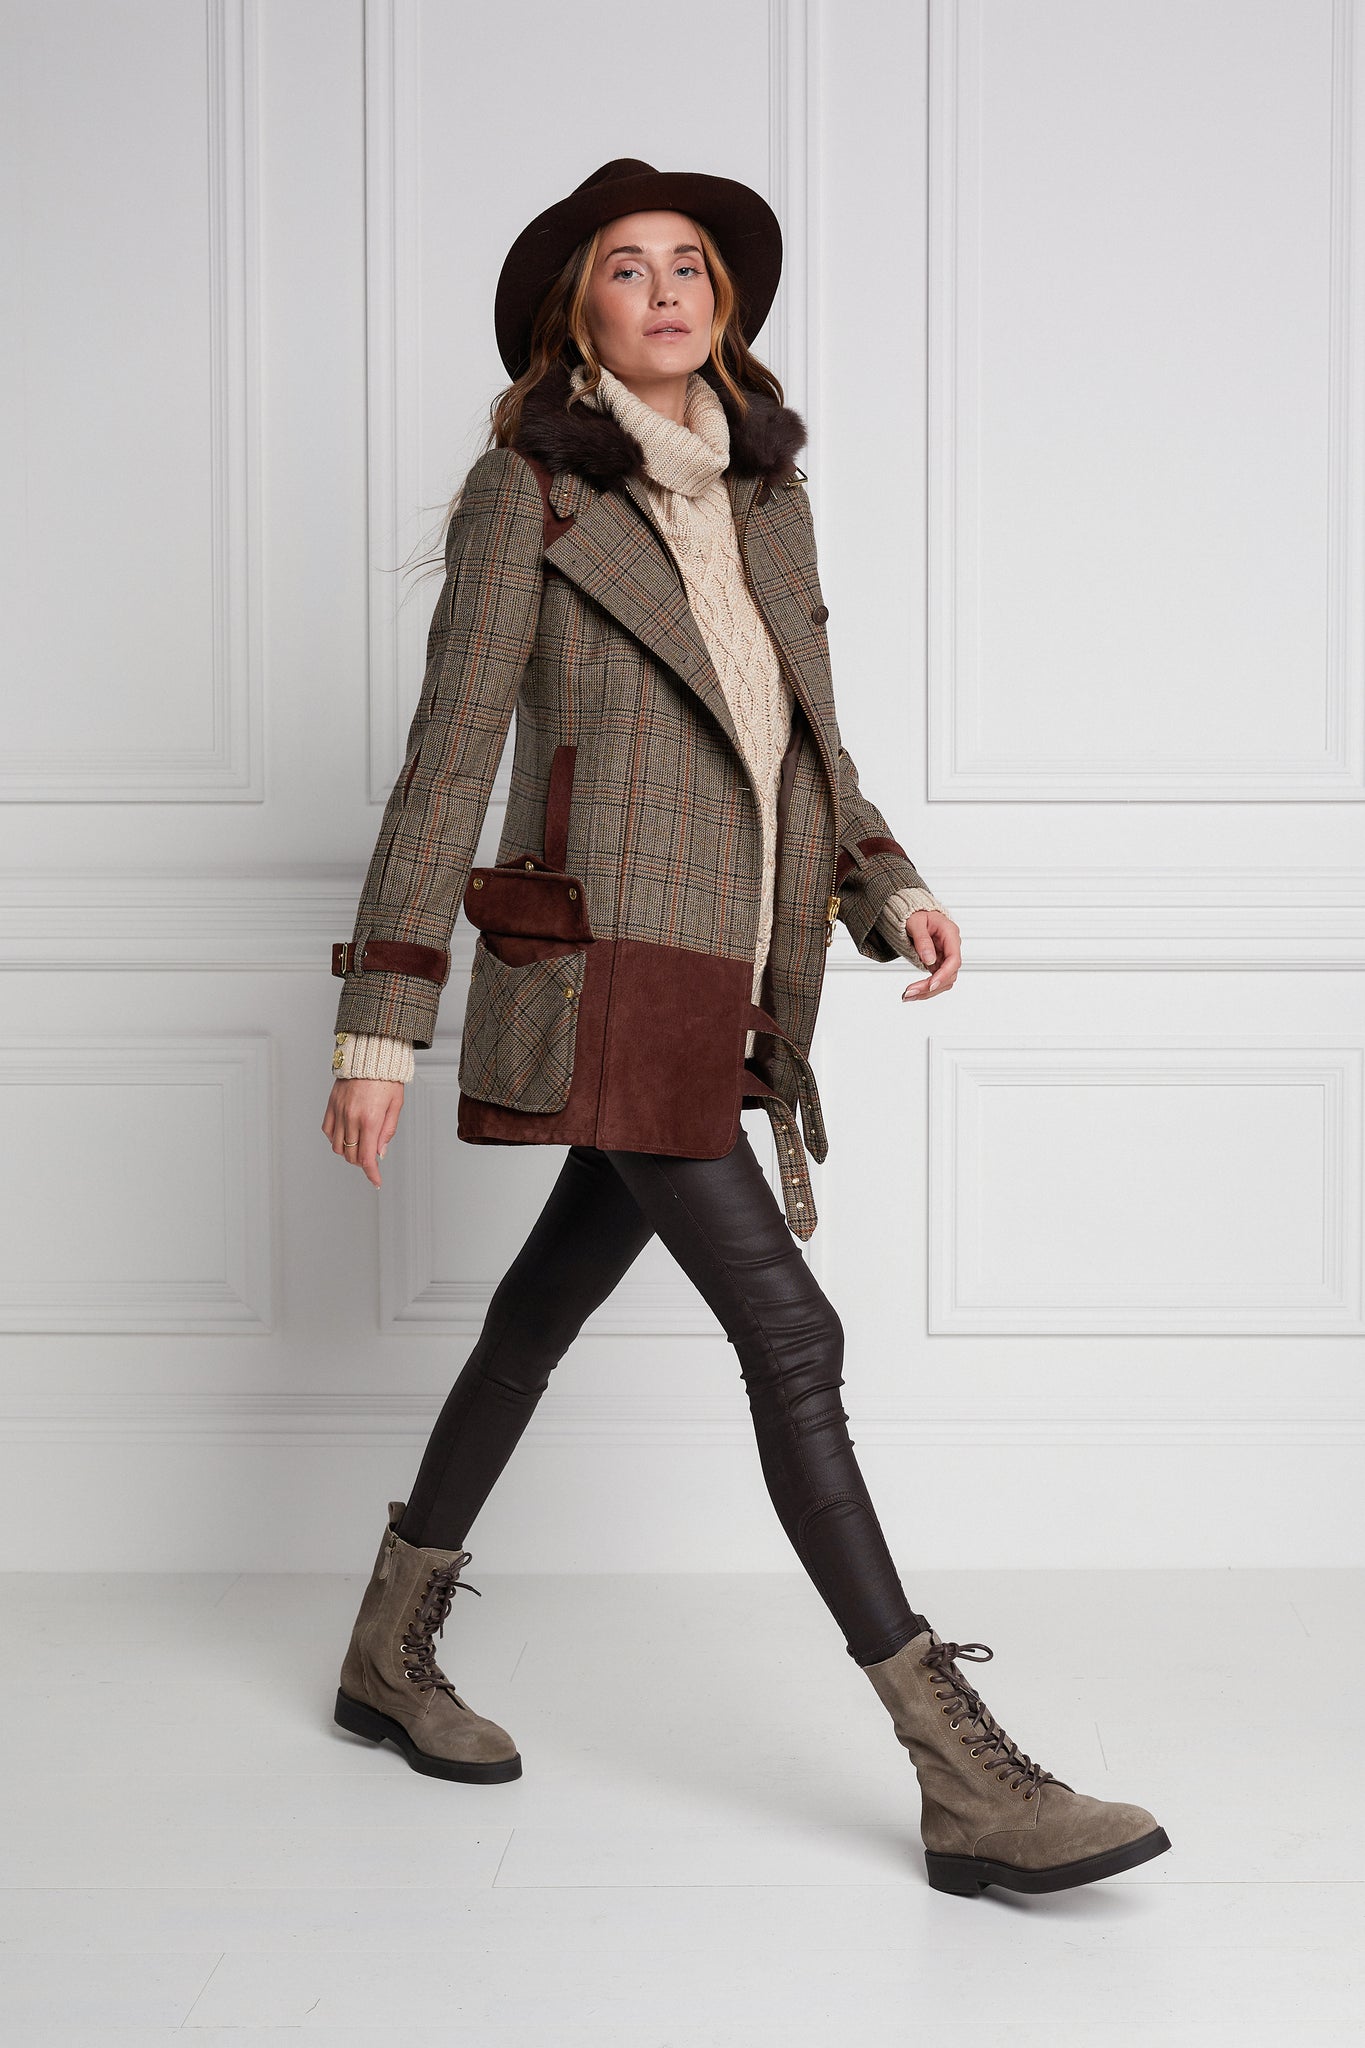 womens fitted field jacket in taupe brown orange and blue tweed trimmed with contrast chocolate suede on shoulder across back and on the hip with faux fur trim around the neck finished with horn button fastenings an buckles on the collar cuffs and hip